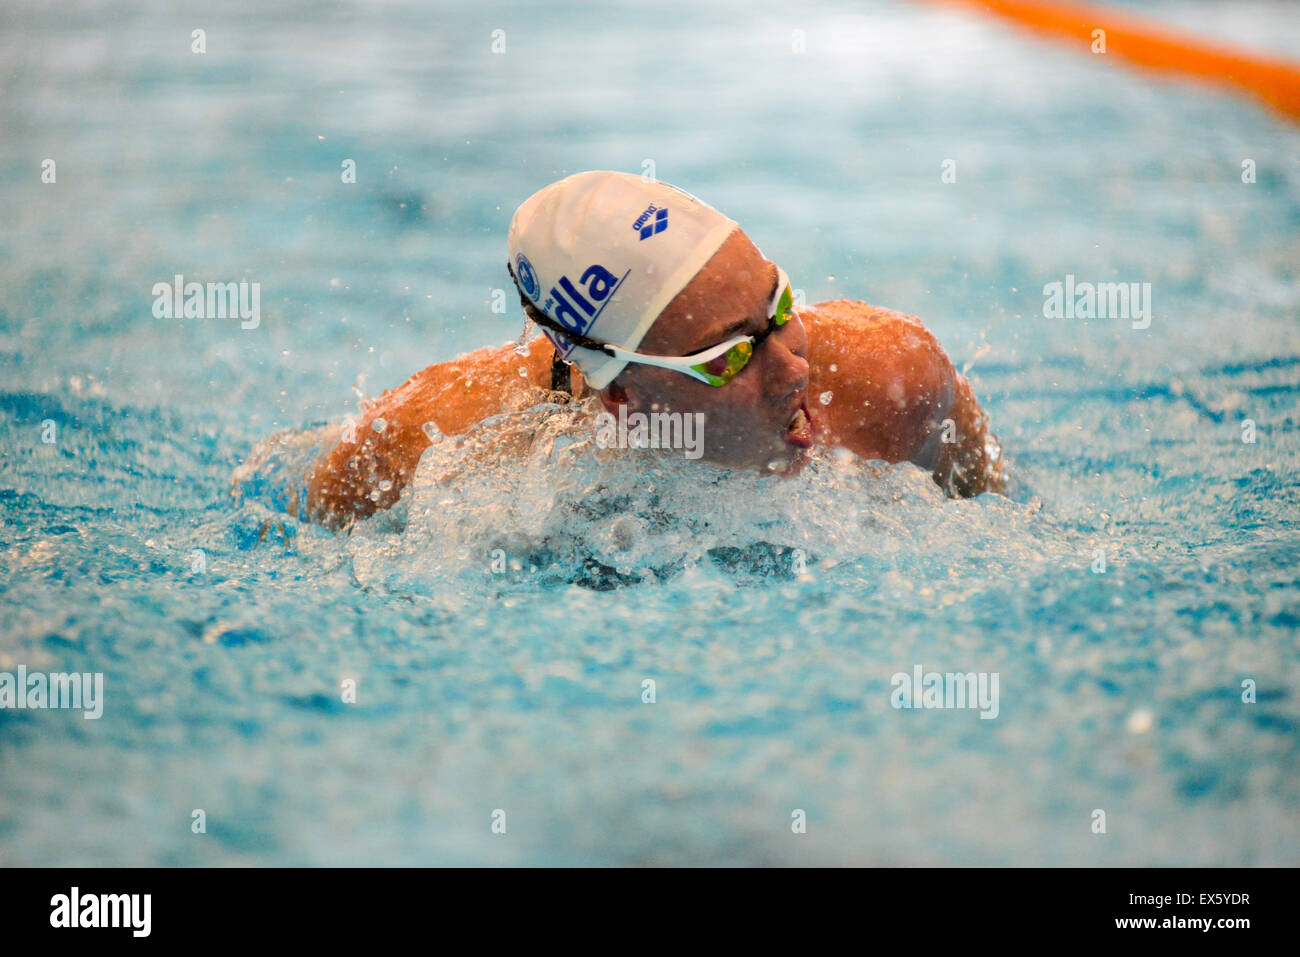 Bergen, Norway. 07th July, 2015. Sarah Louise Rung of Madla SK at the 50m butterfly final in the 2015 Norwegian Championship in Ado Arena in Bergen, were she posts 42,79. She is participating in class S5 in the disability swimming classification. At the London Paralympics 2012 she also won the gold in the same event with the time  41,76. Credit:  Kjell Eirik Irgens Henanger/Alamy Live News Stock Photo